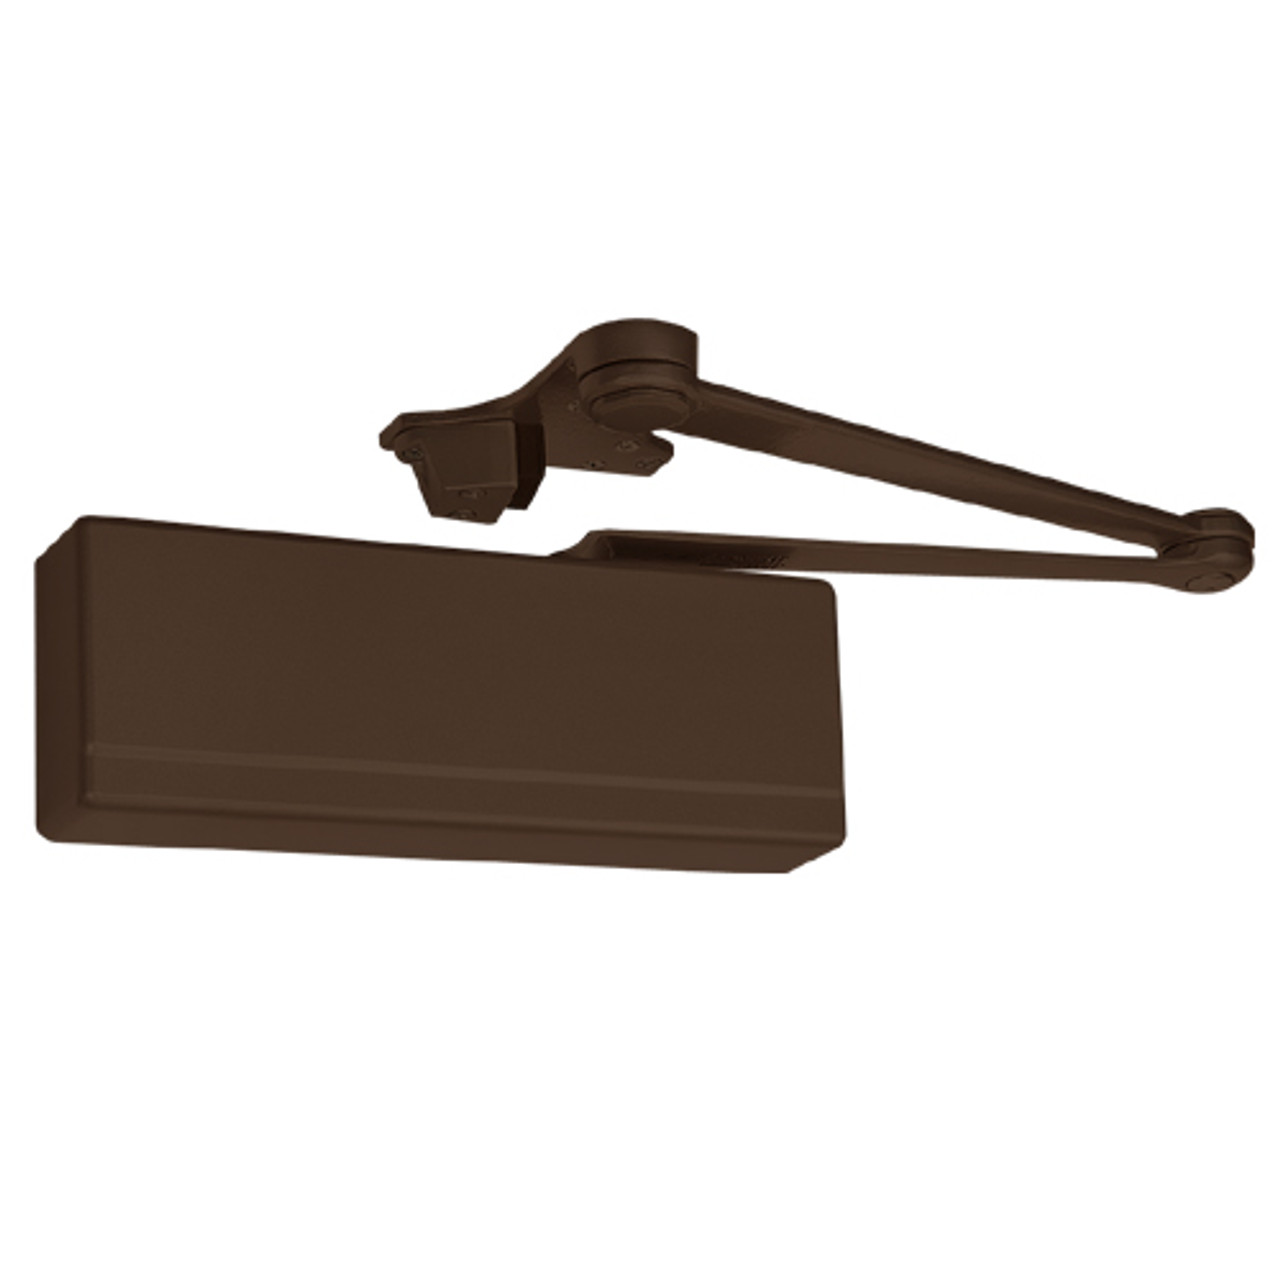 281-CPS-10BE Sargent 281 Series Powerglide Cast Iron Door Closer with Heavy Duty Parallel Arm with Compression Stop in Dark Oxidized Satin Bronze